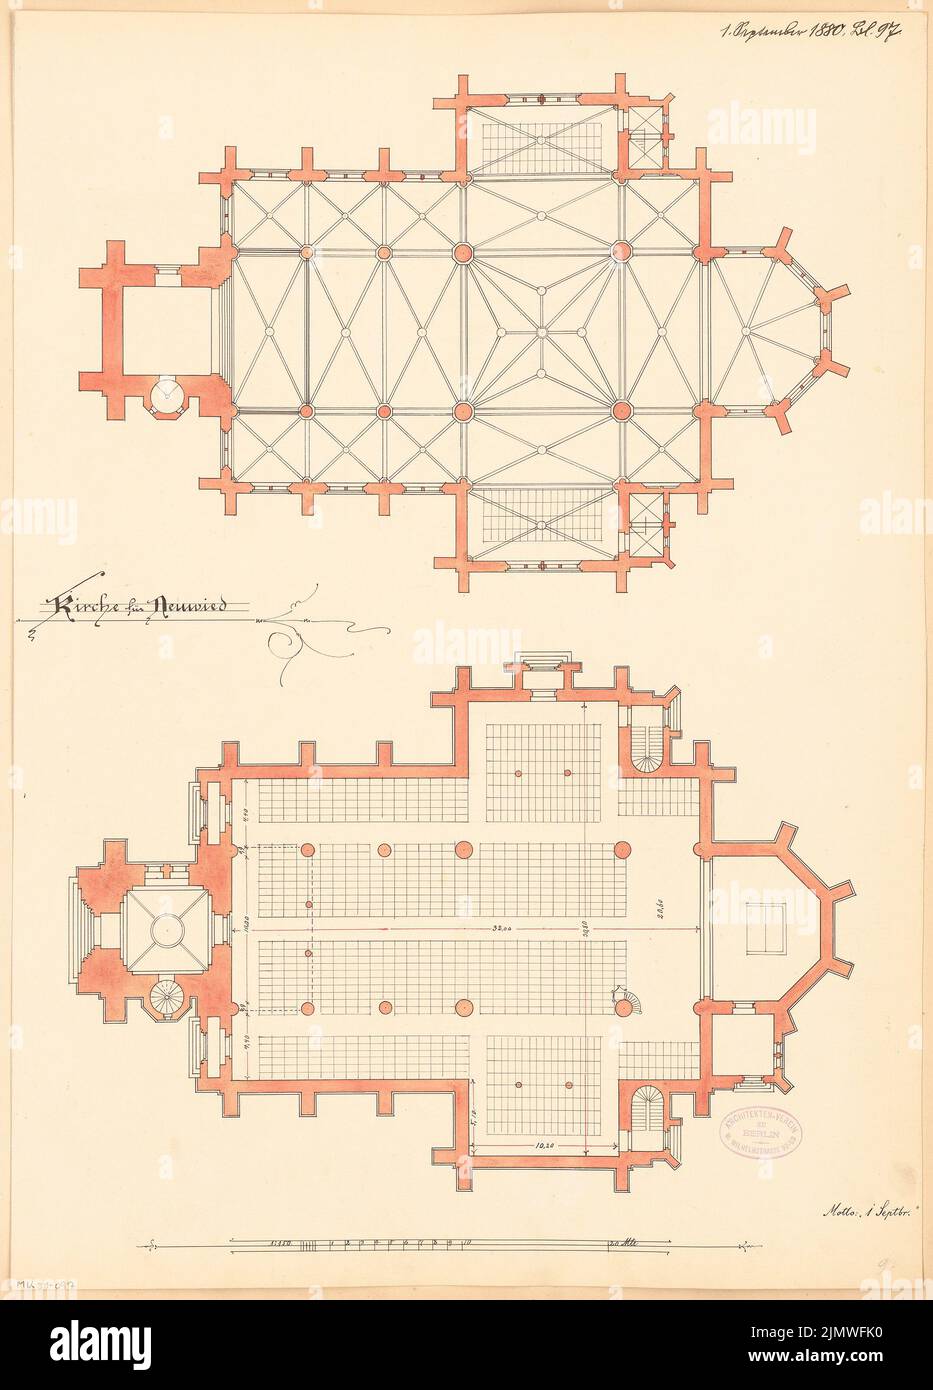 Unknown architect, Evangelical Church in Neuwied. Monthly competition September 1880 (09.1880): floor plan ground floor, gallery floor; Scale bar. Tusche watercolor on the box, 59.3 x 42.6 cm (including scan edges) N.N. : Evangelische Kirche, Neuwied. Monatskonkurrenz September 1880 Stock Photo